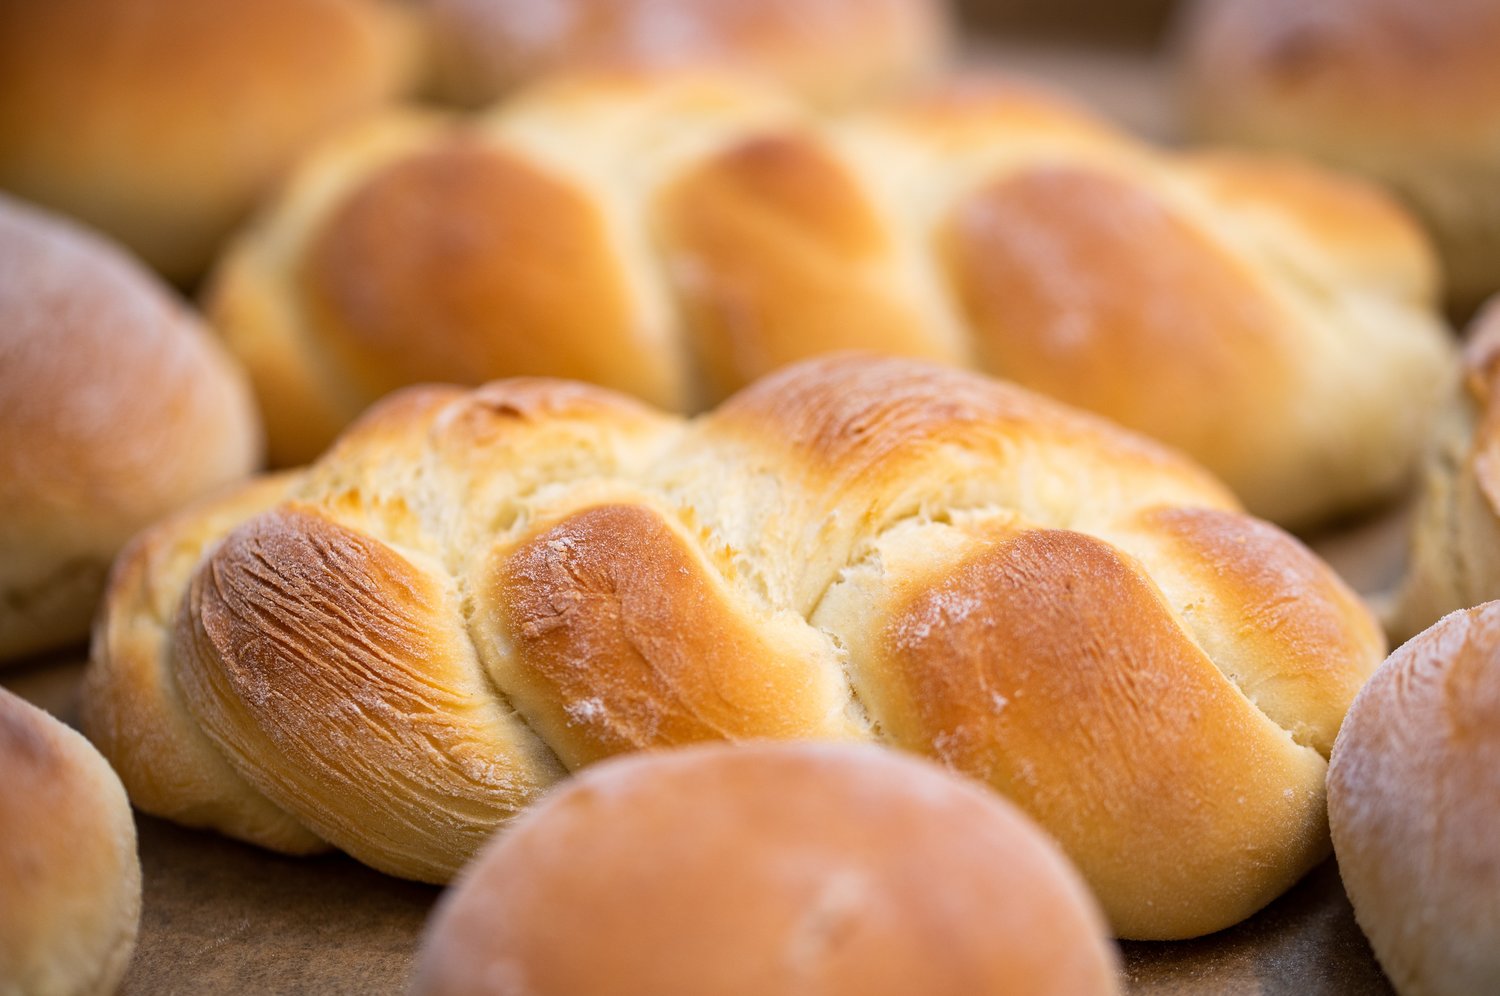 Challah is also a frequent fixture of Rosh Hashana celebrations, as “the circular shape of the loaf symbolizes the circle of life.” Who knew?